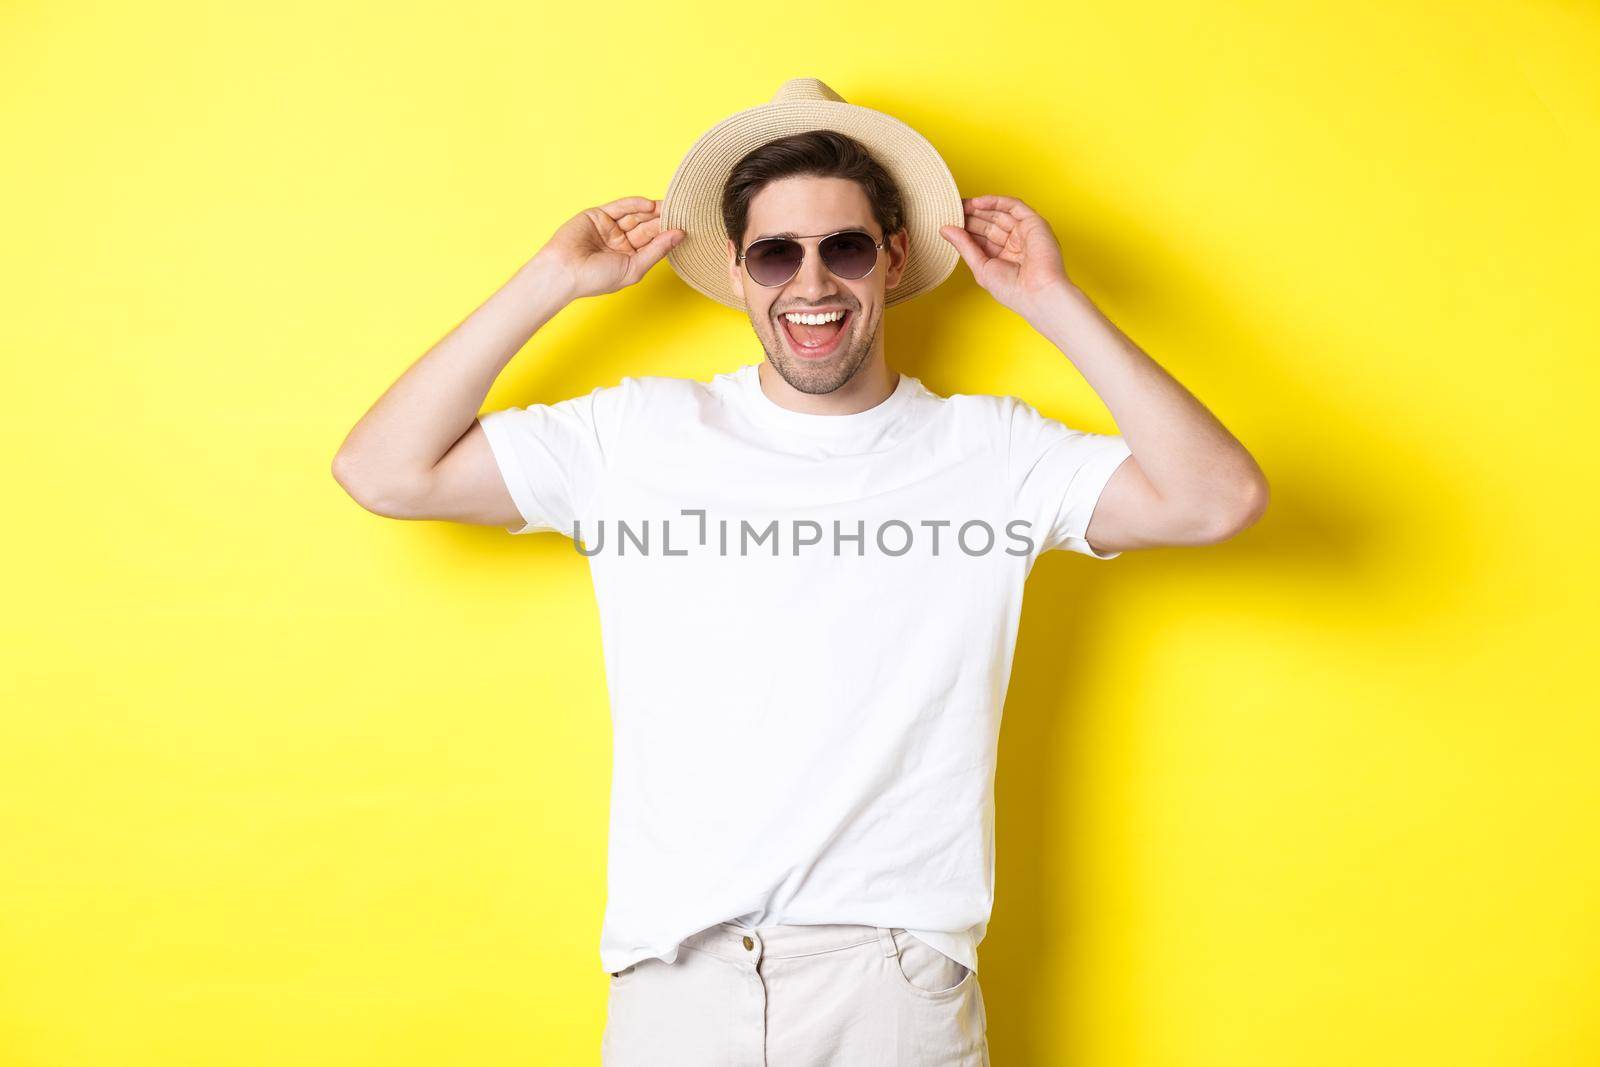 Happy man on vacation, wearing straw hat and sunglasses, smiling while standing against yellow background.